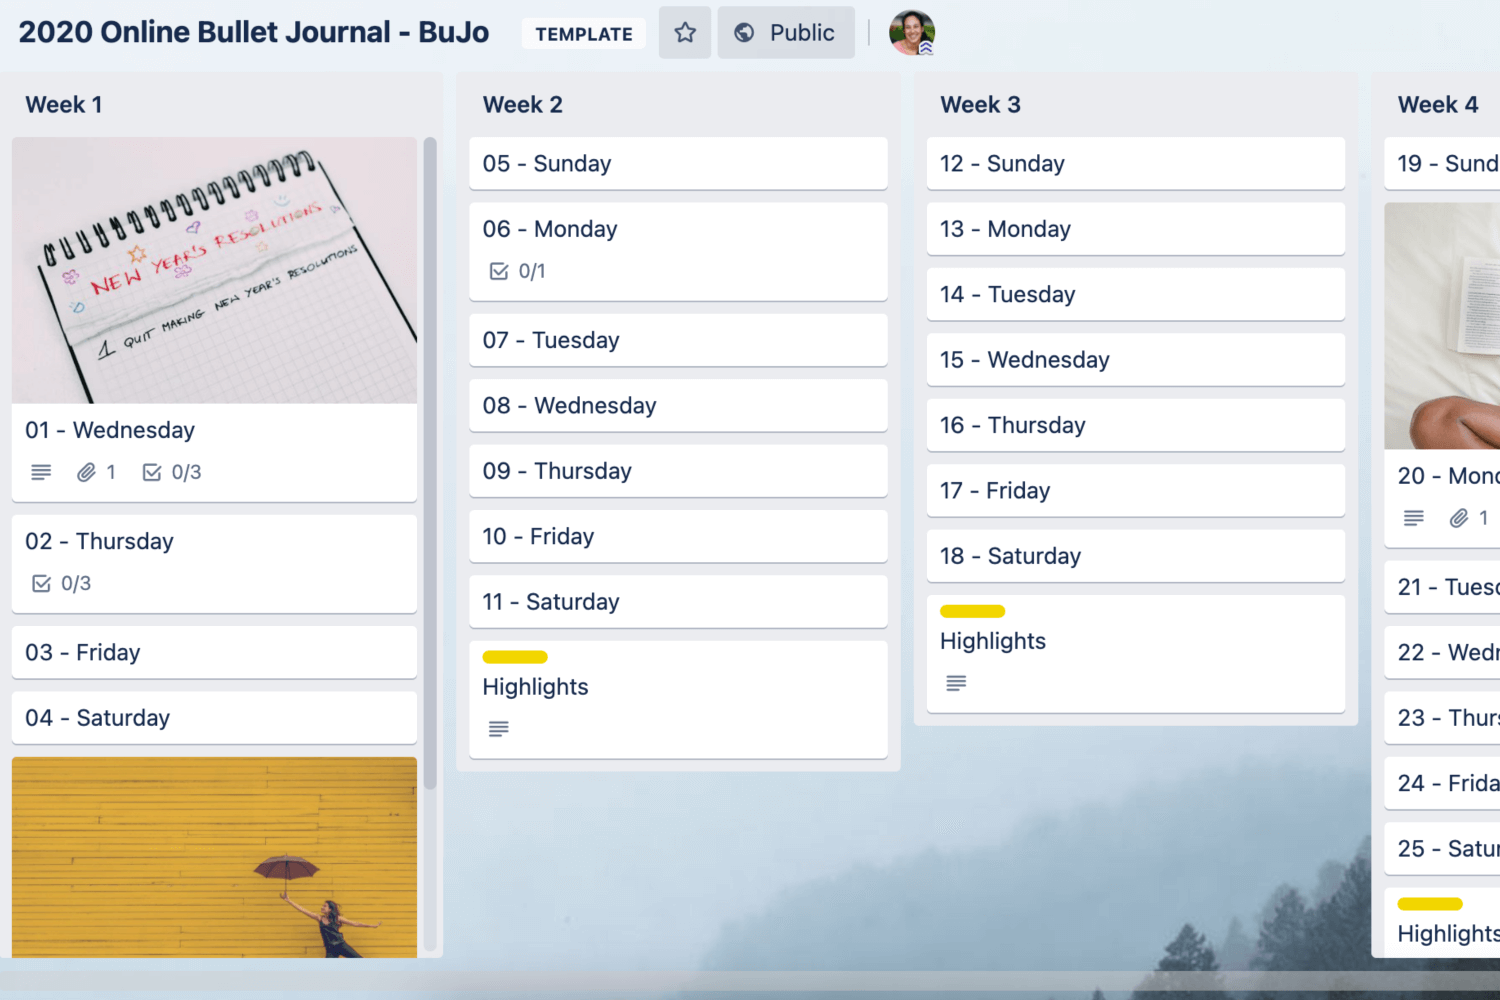 Power hour 9, Trello - Stay focused and organise your day